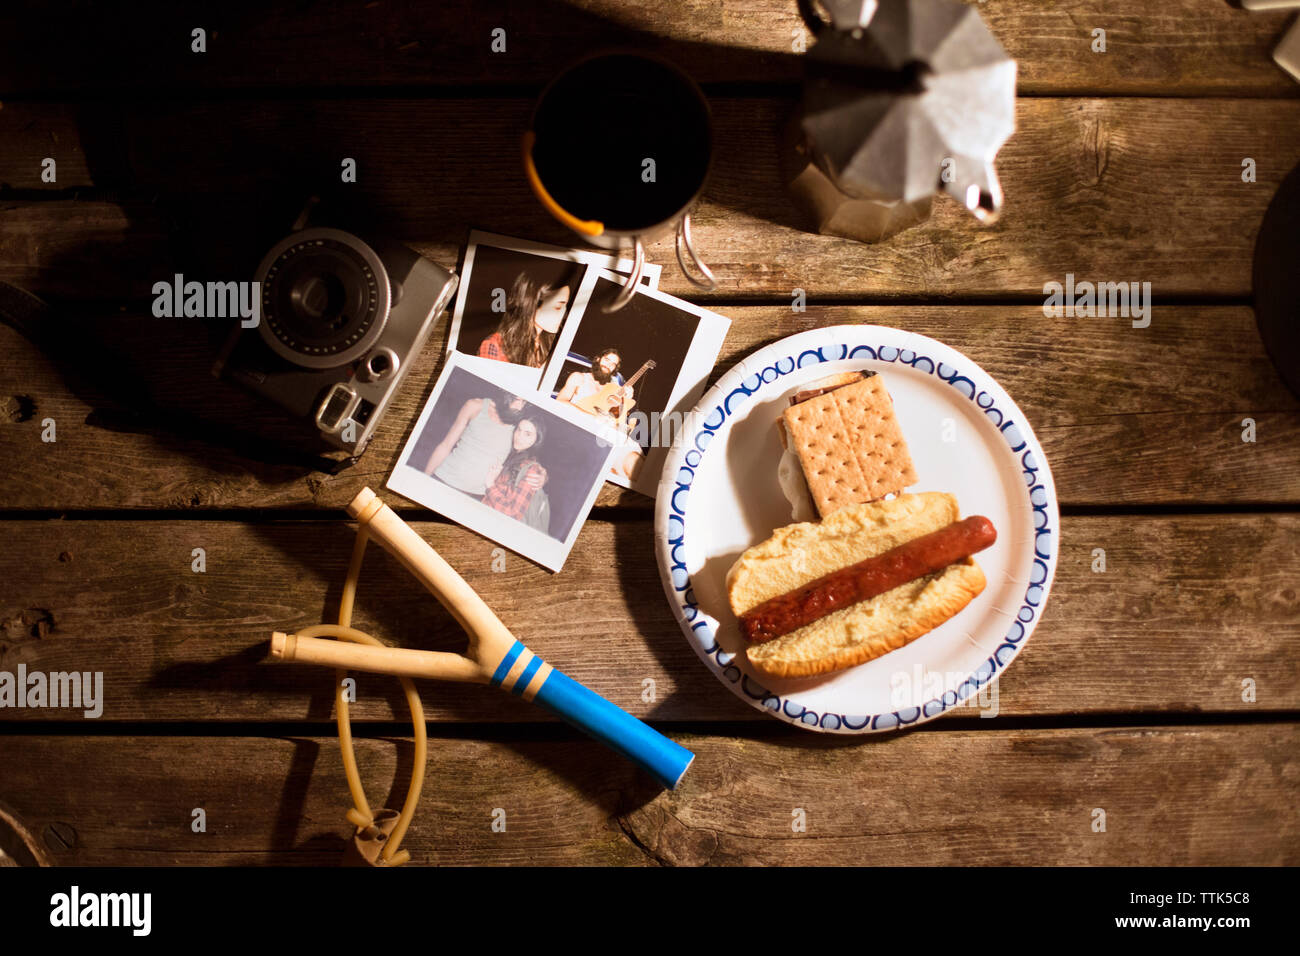 Overhead view of photographs and food with slingshot on wooden table Stock Photo